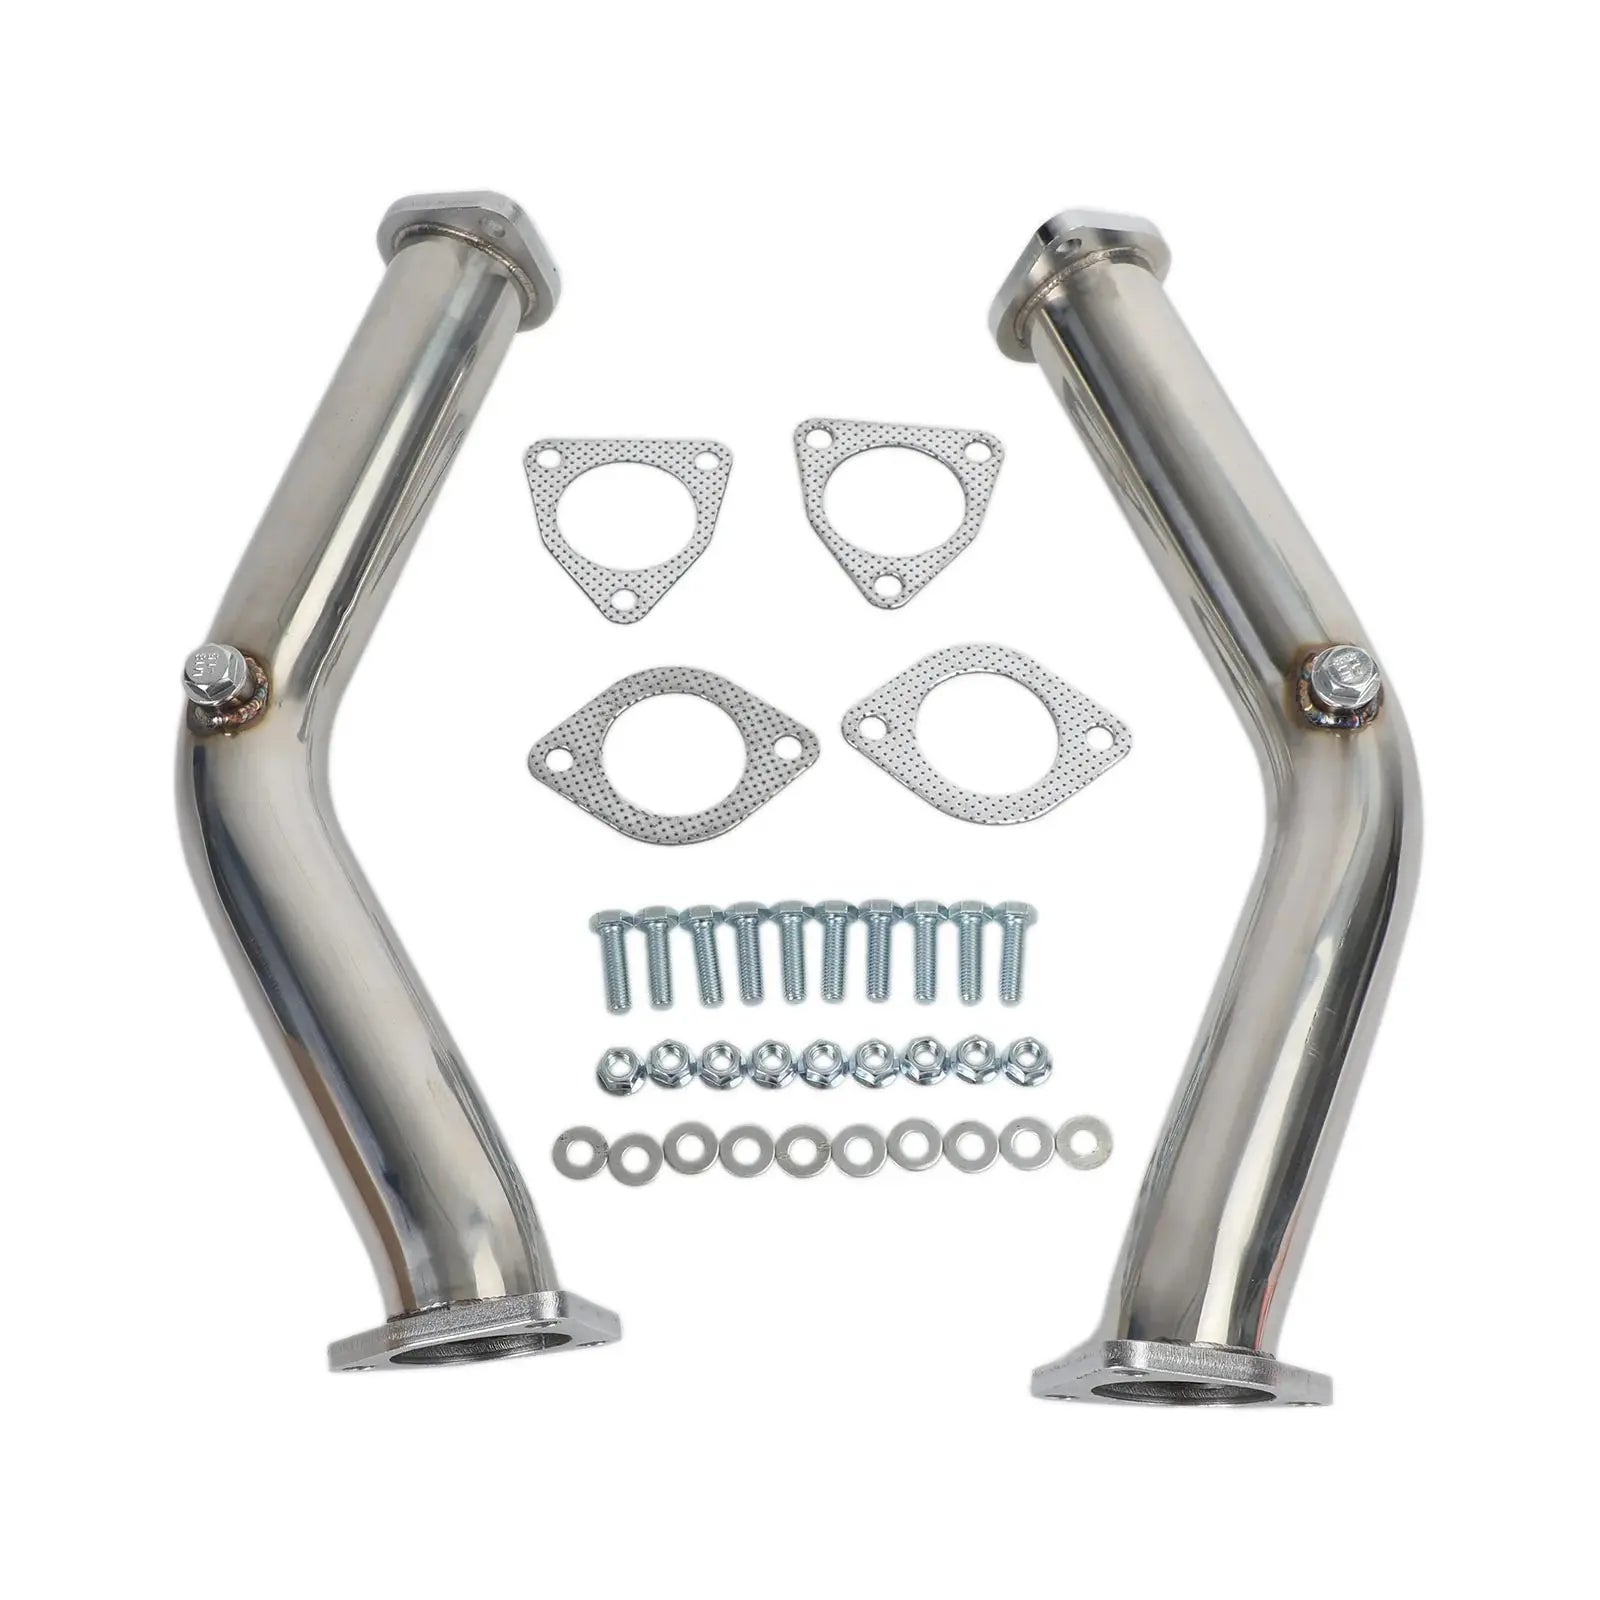 Downpipe Exhaust for 2003-2007 Nissan 350z/G35 Flashark